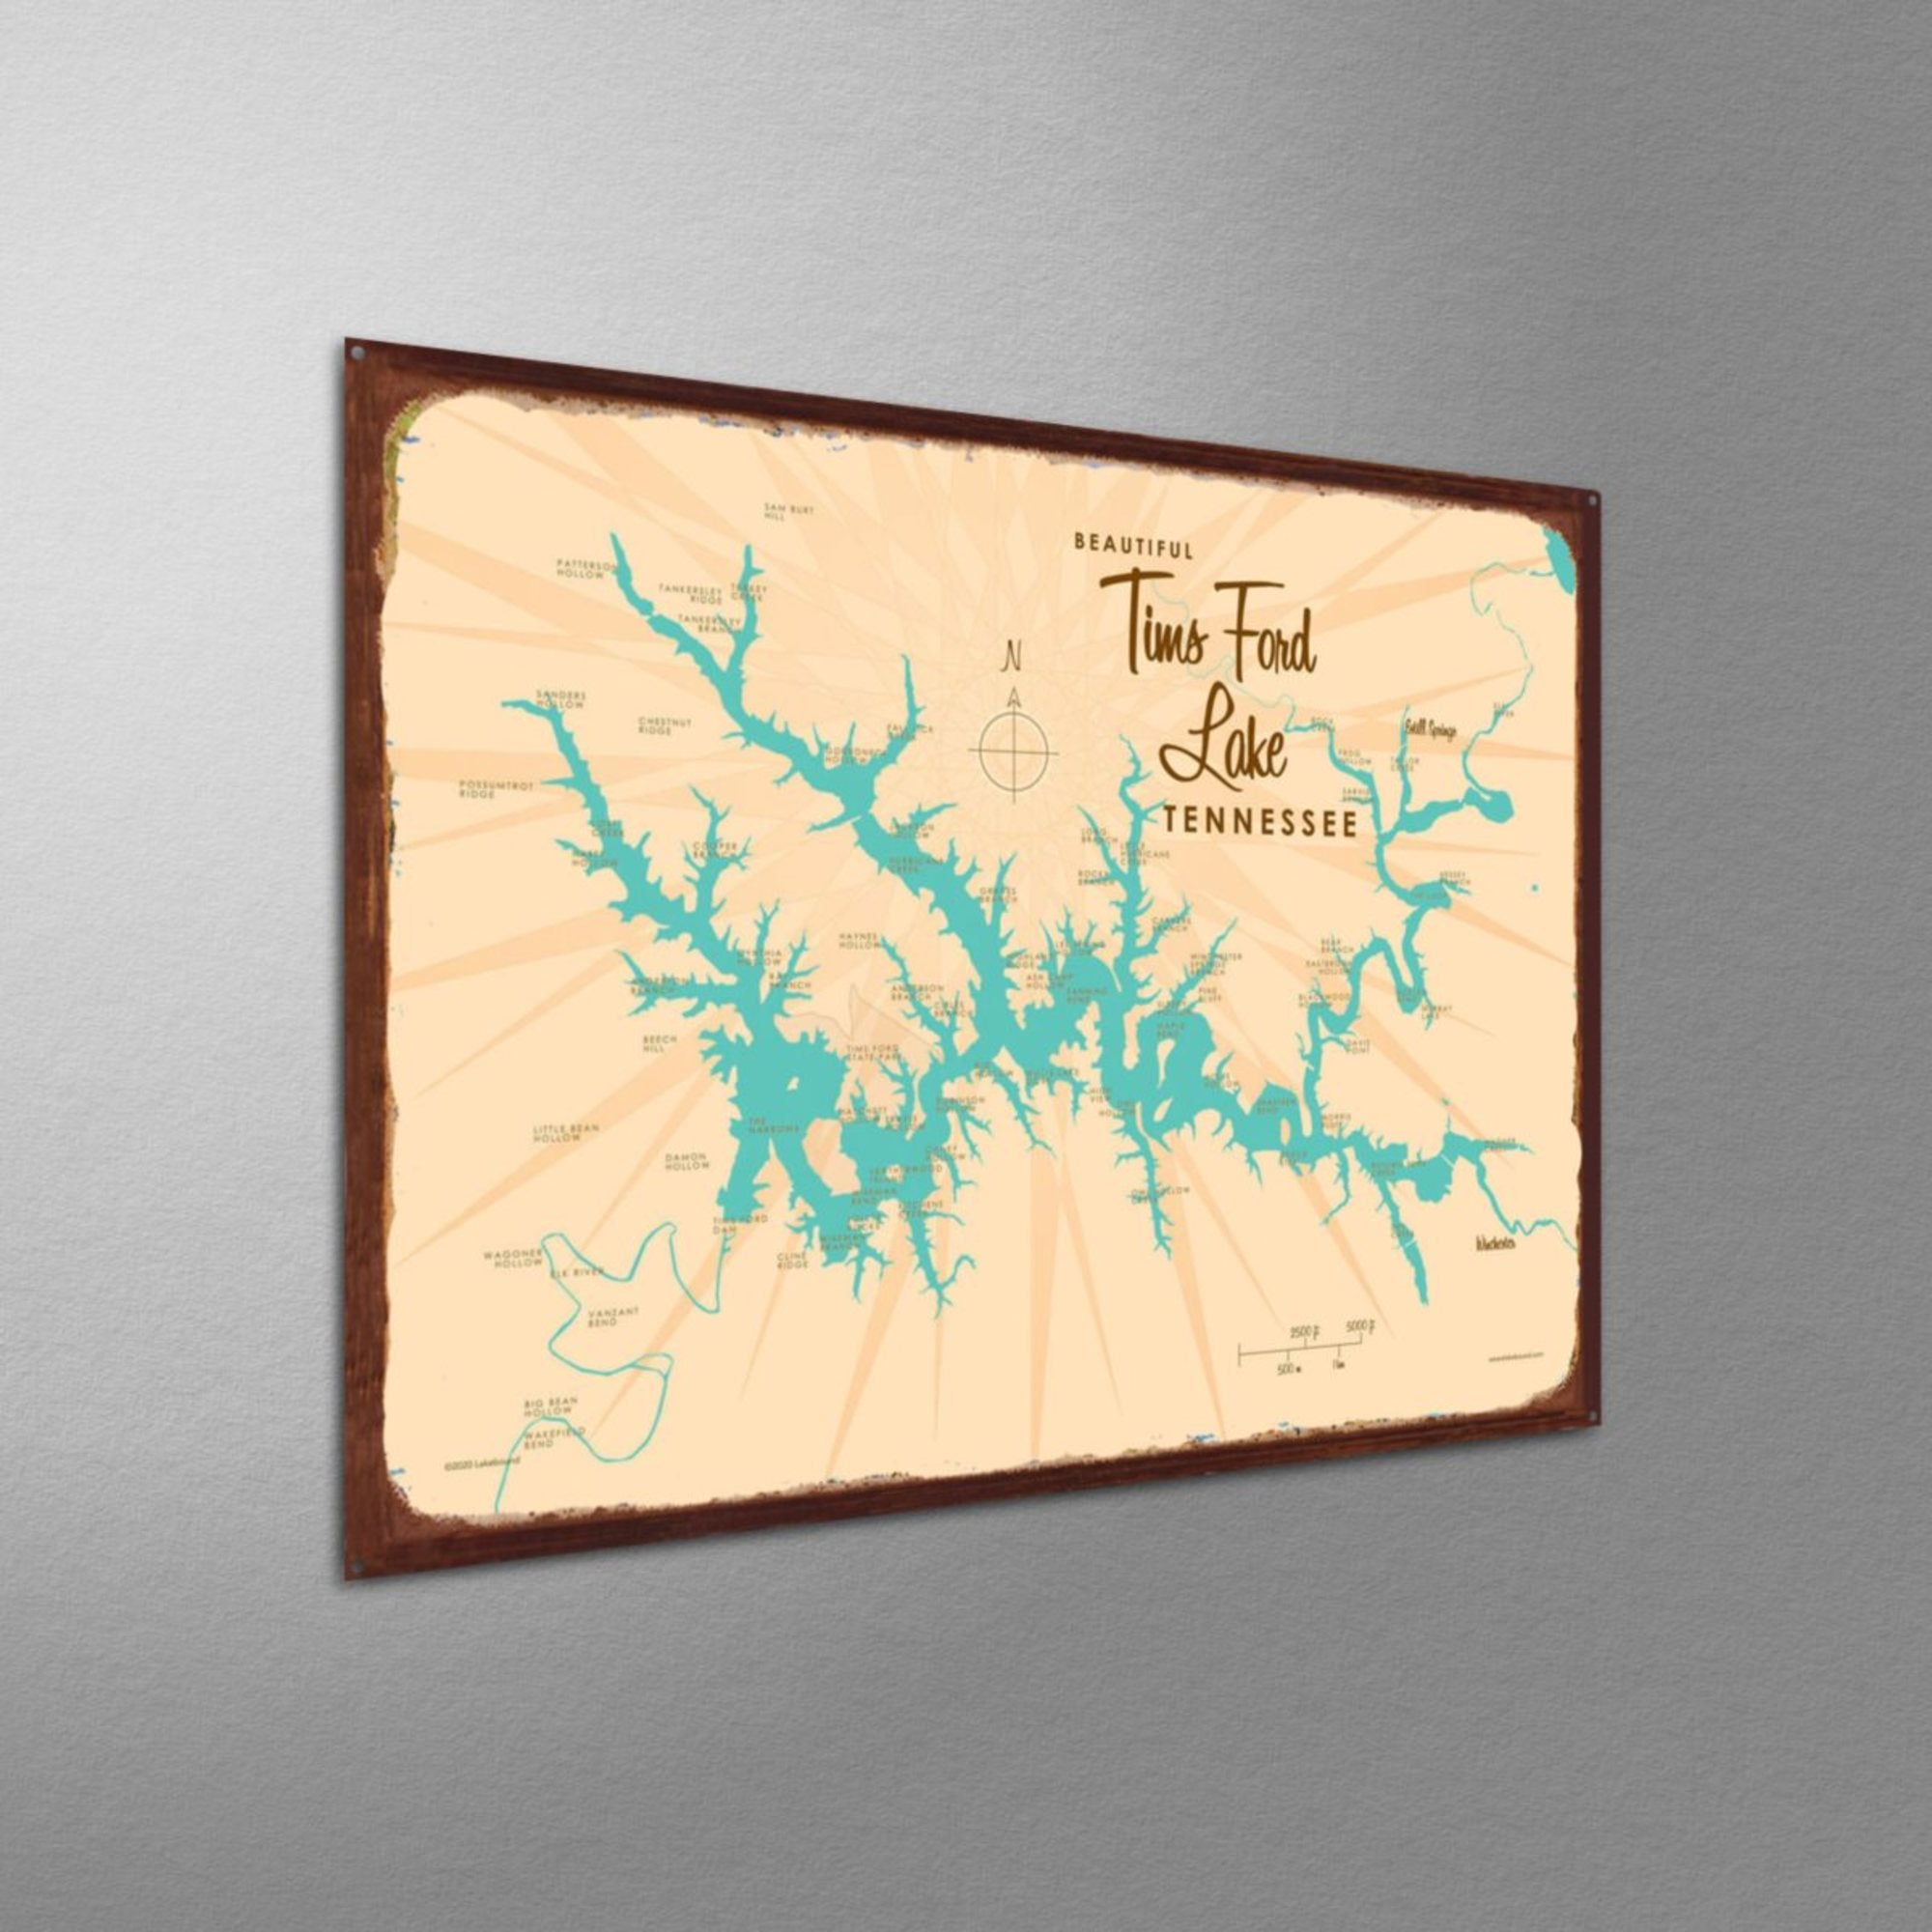 Tims Ford Lake Tennessee, Rustic Metal Sign Map Art